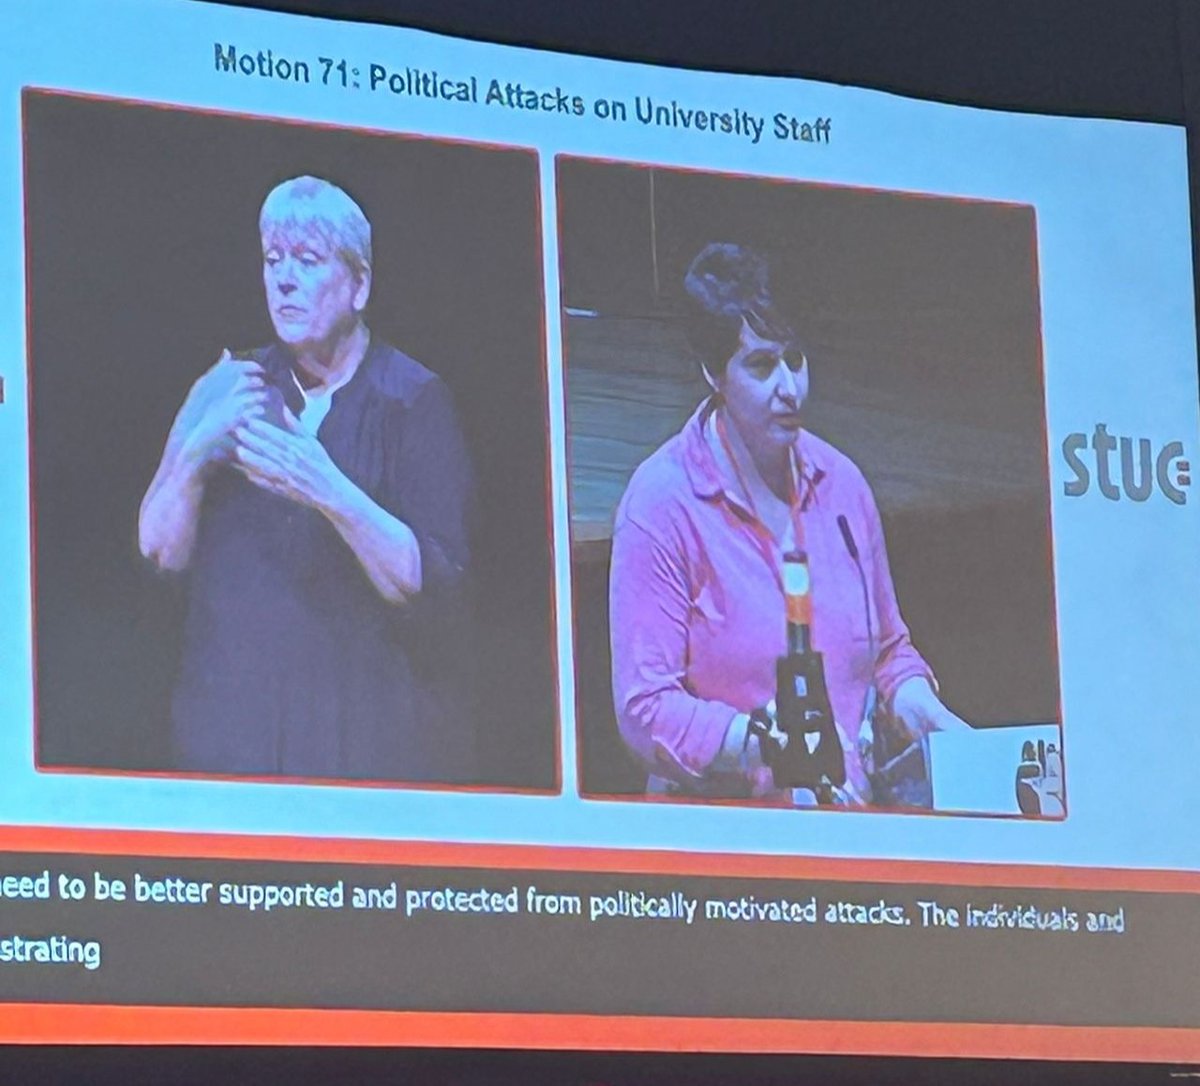 Jehan Al-Azzawi supports Motion 71 at #STUC24, concerning political attacks on university staff, 'Teachers have the right to speak out on matters of social justice.'